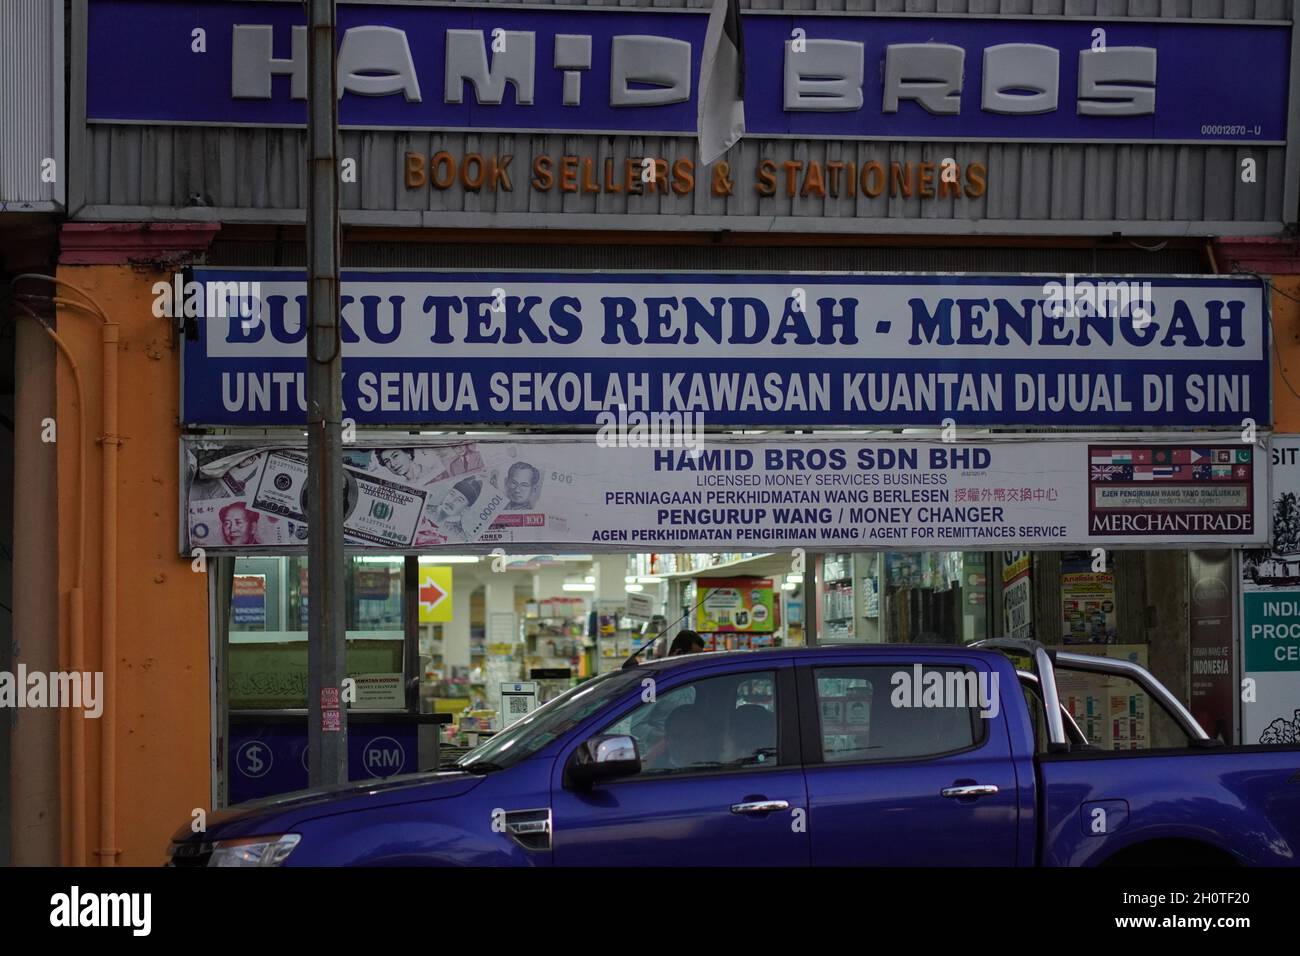 Kedai High Resolution Stock Photography and Images - Alamy